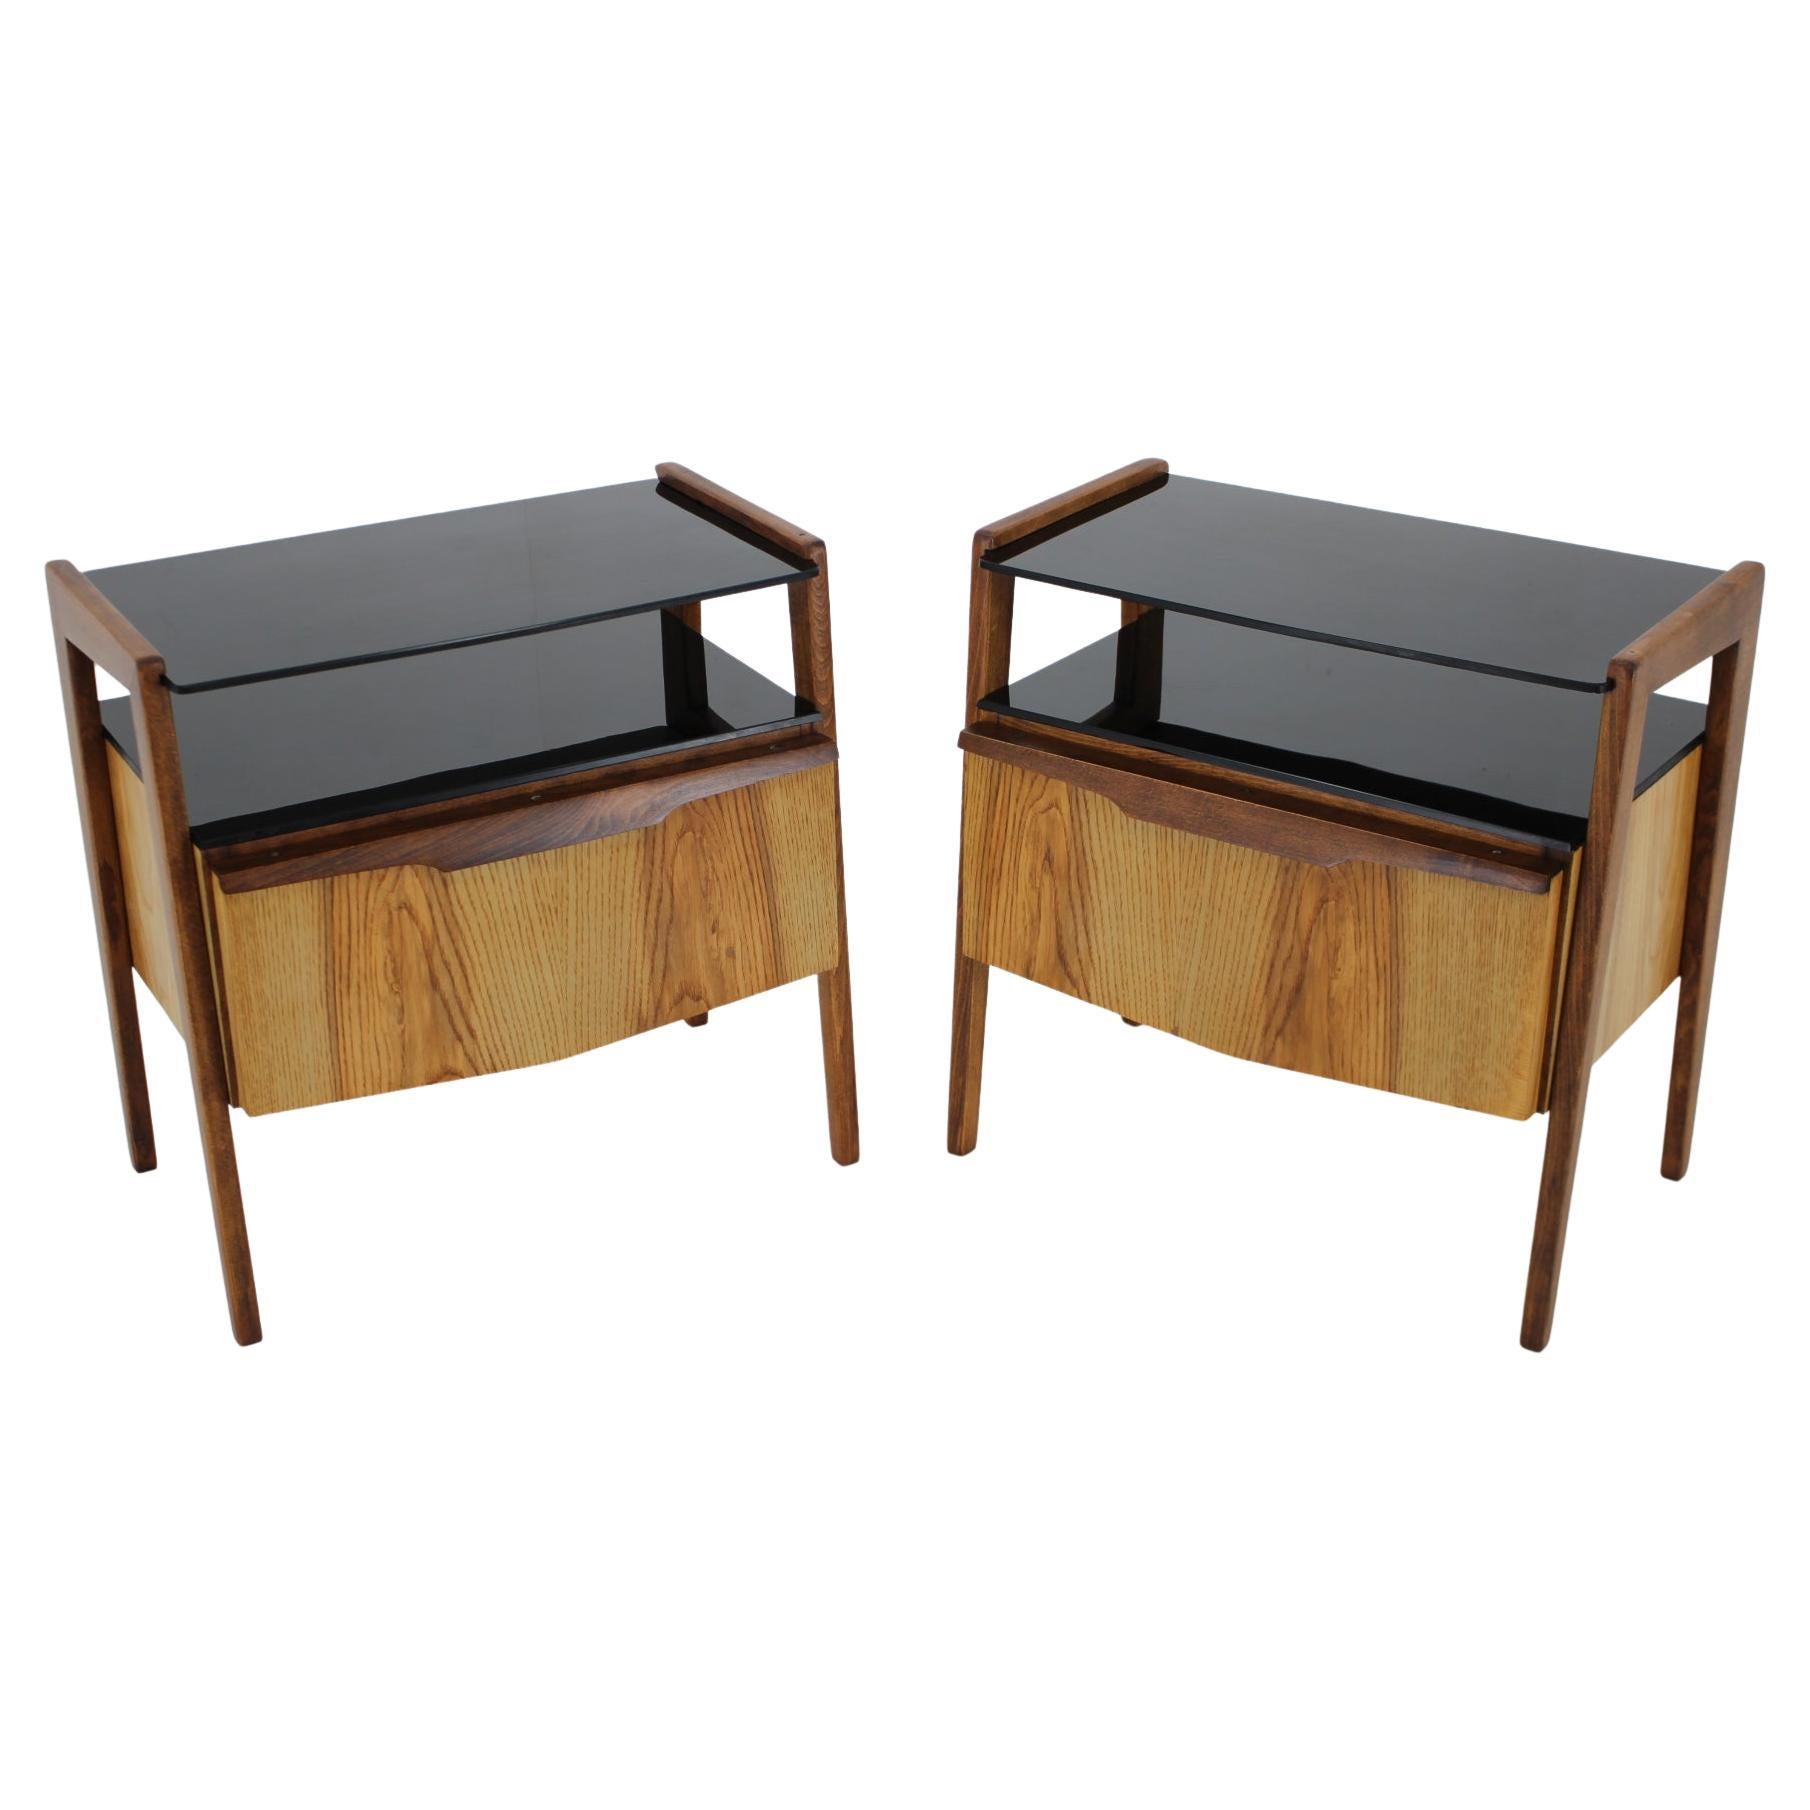 1960s Pair of Restored Bedside Tables, Czechoslovakia For Sale